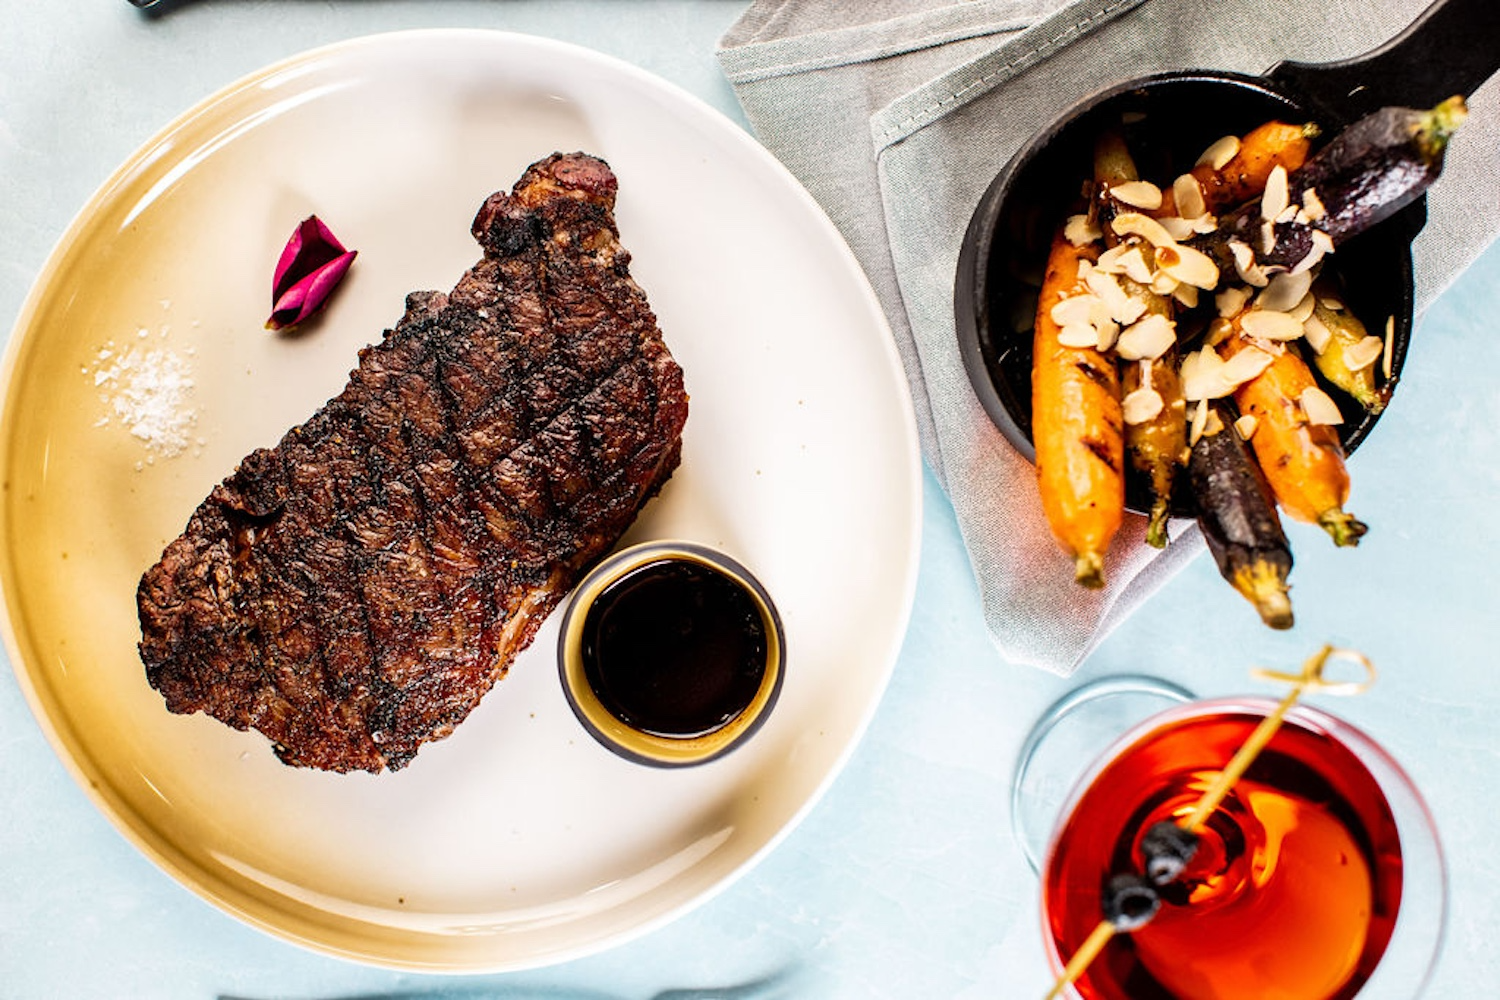 steak with sauce on the side and a flower petal on a plate, cocktail, squash with nuts, 